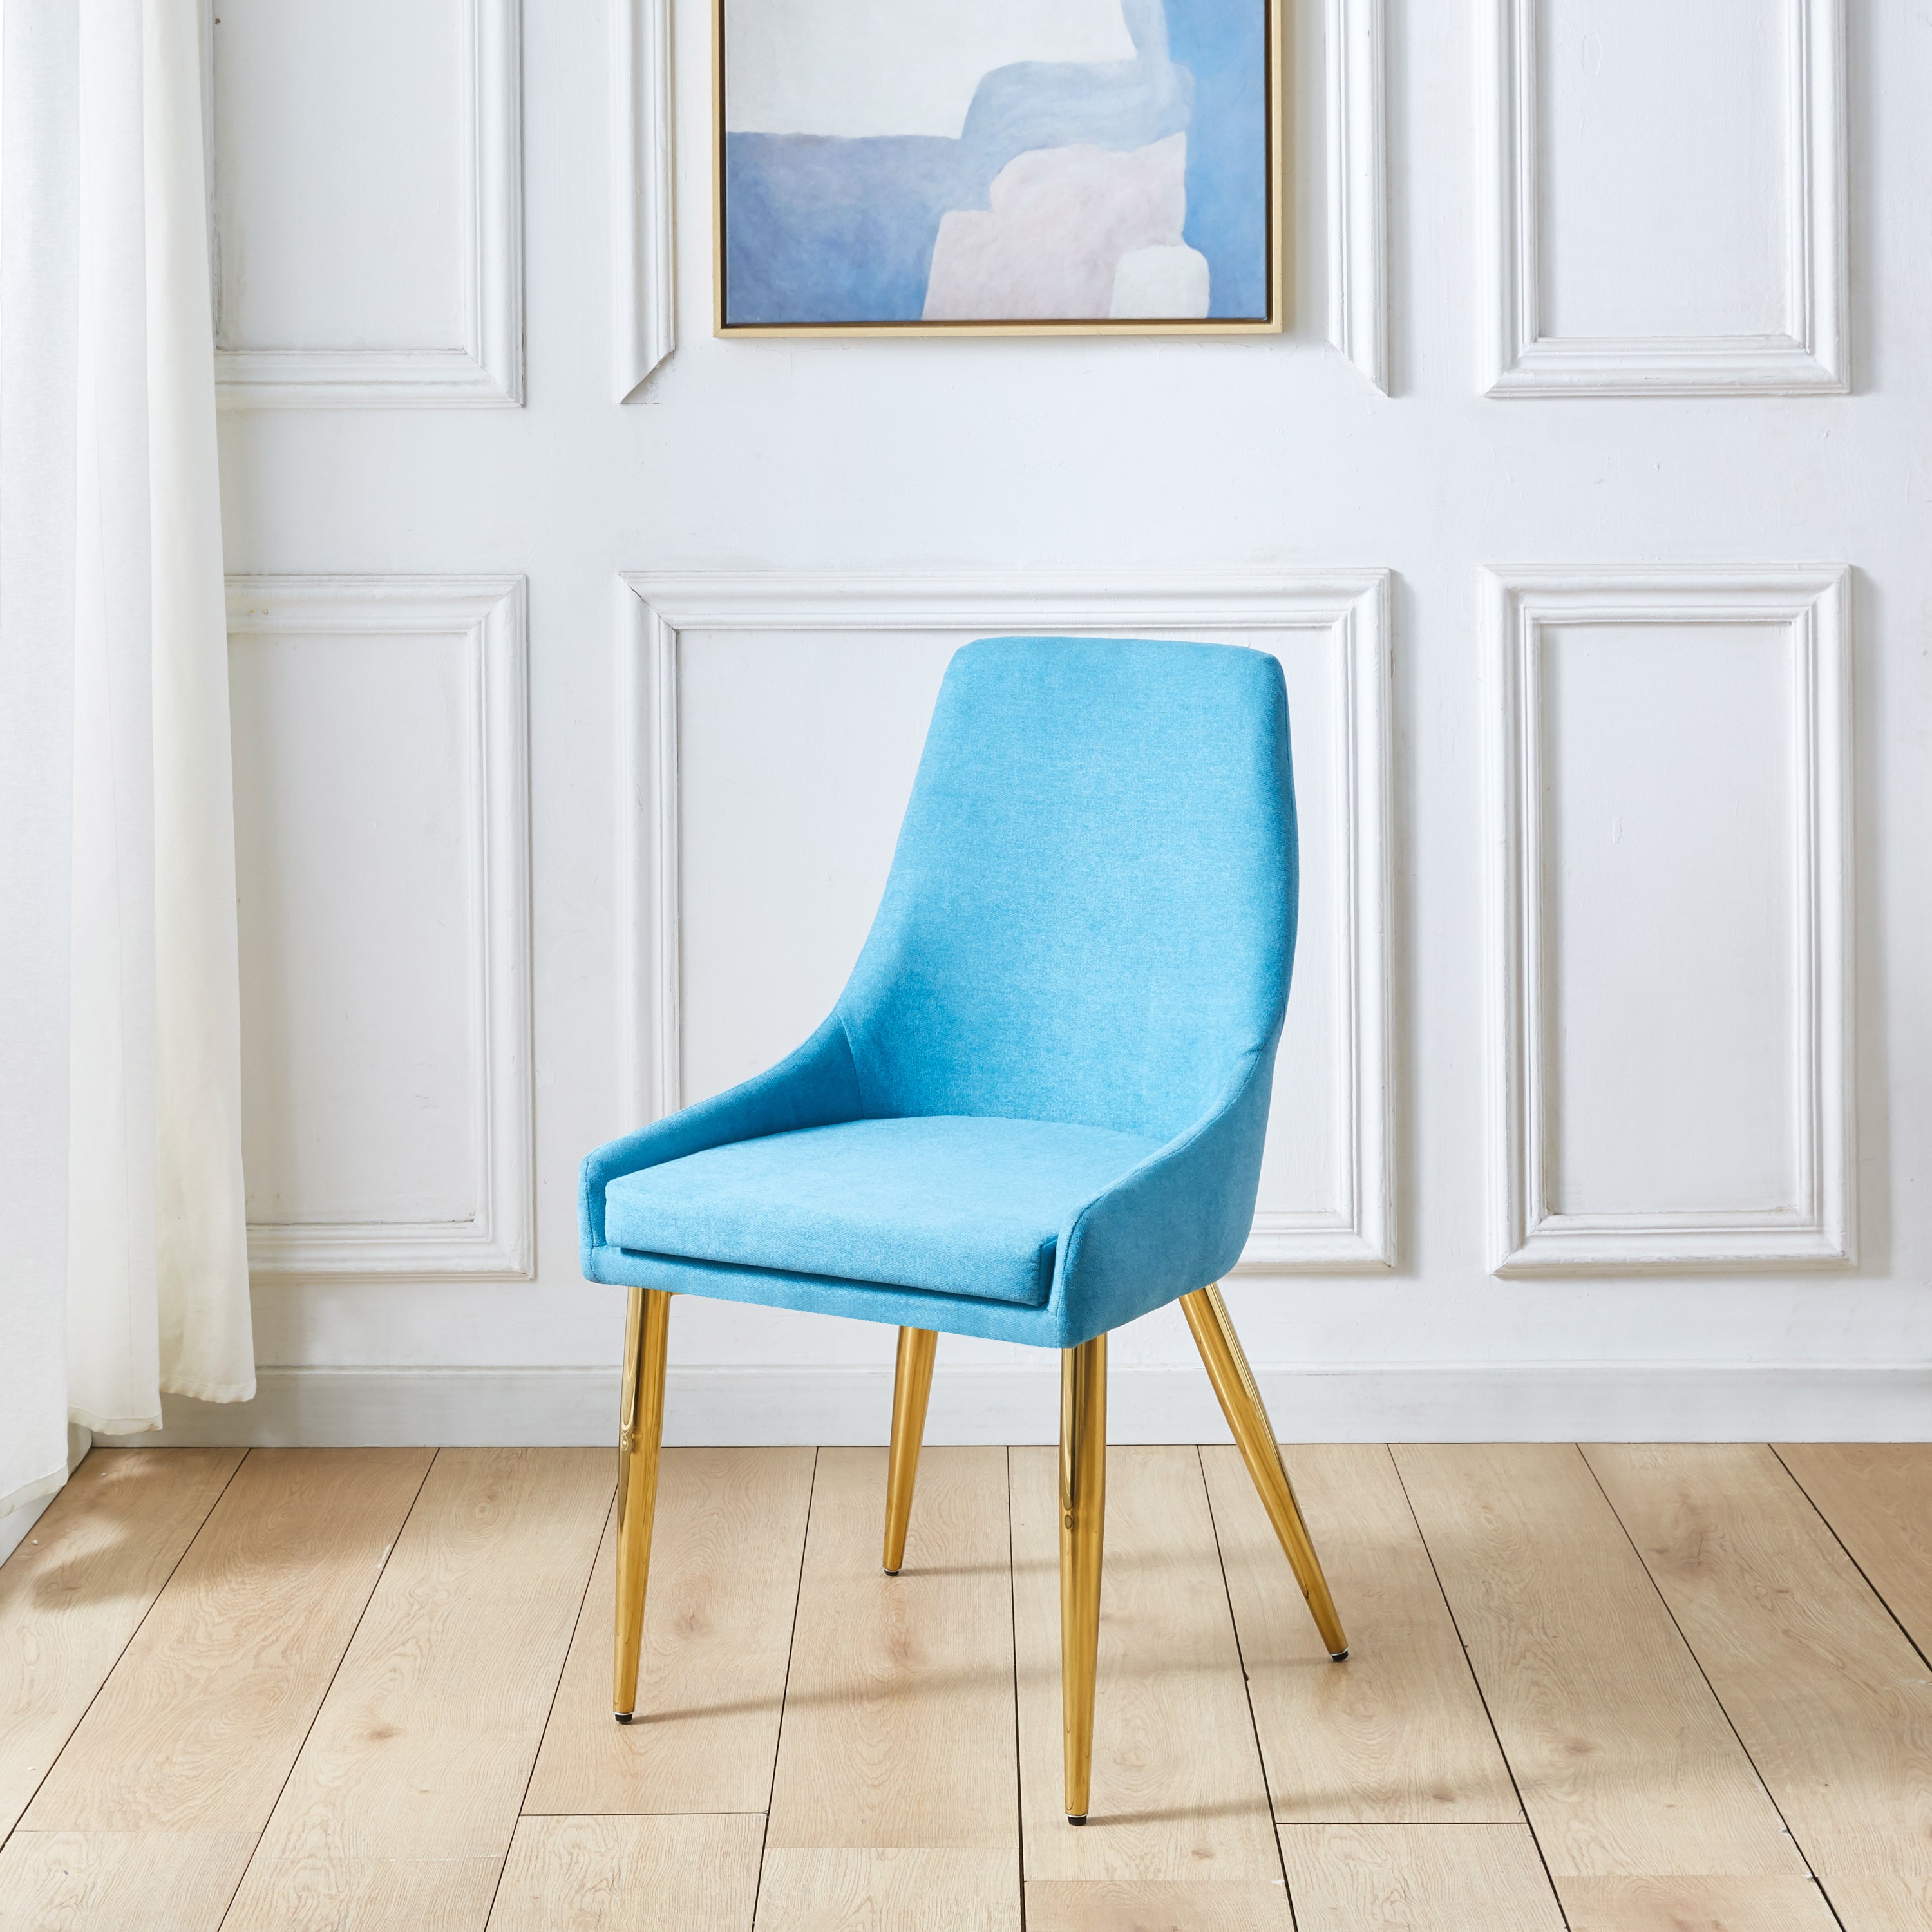 Light blue dining chairs